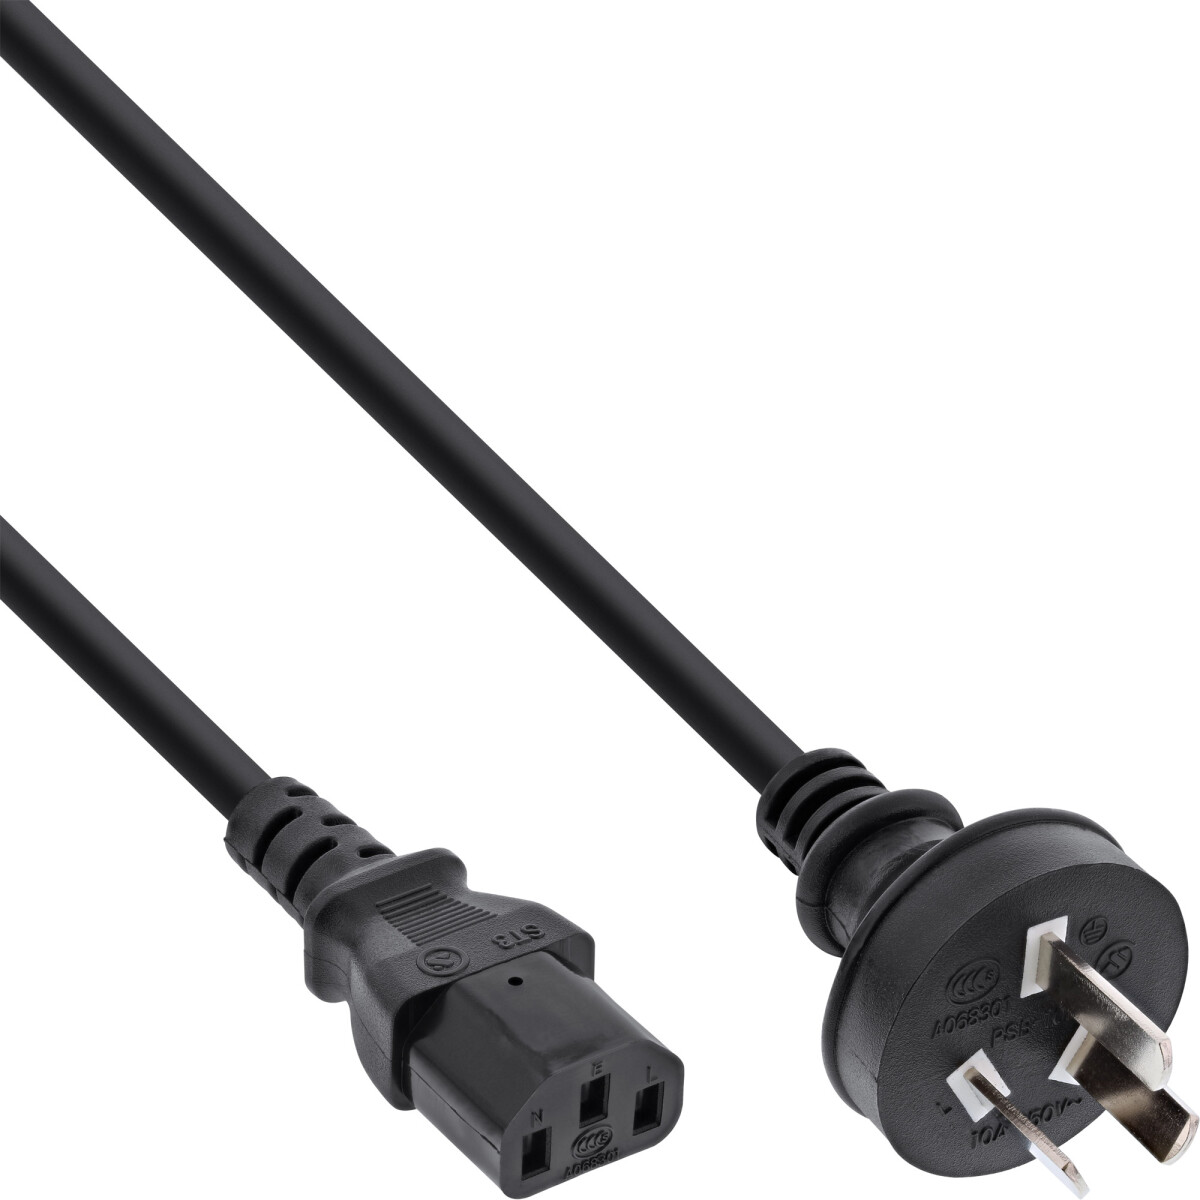 InLine® Power cable, China plug to IEC, black, 0.5m